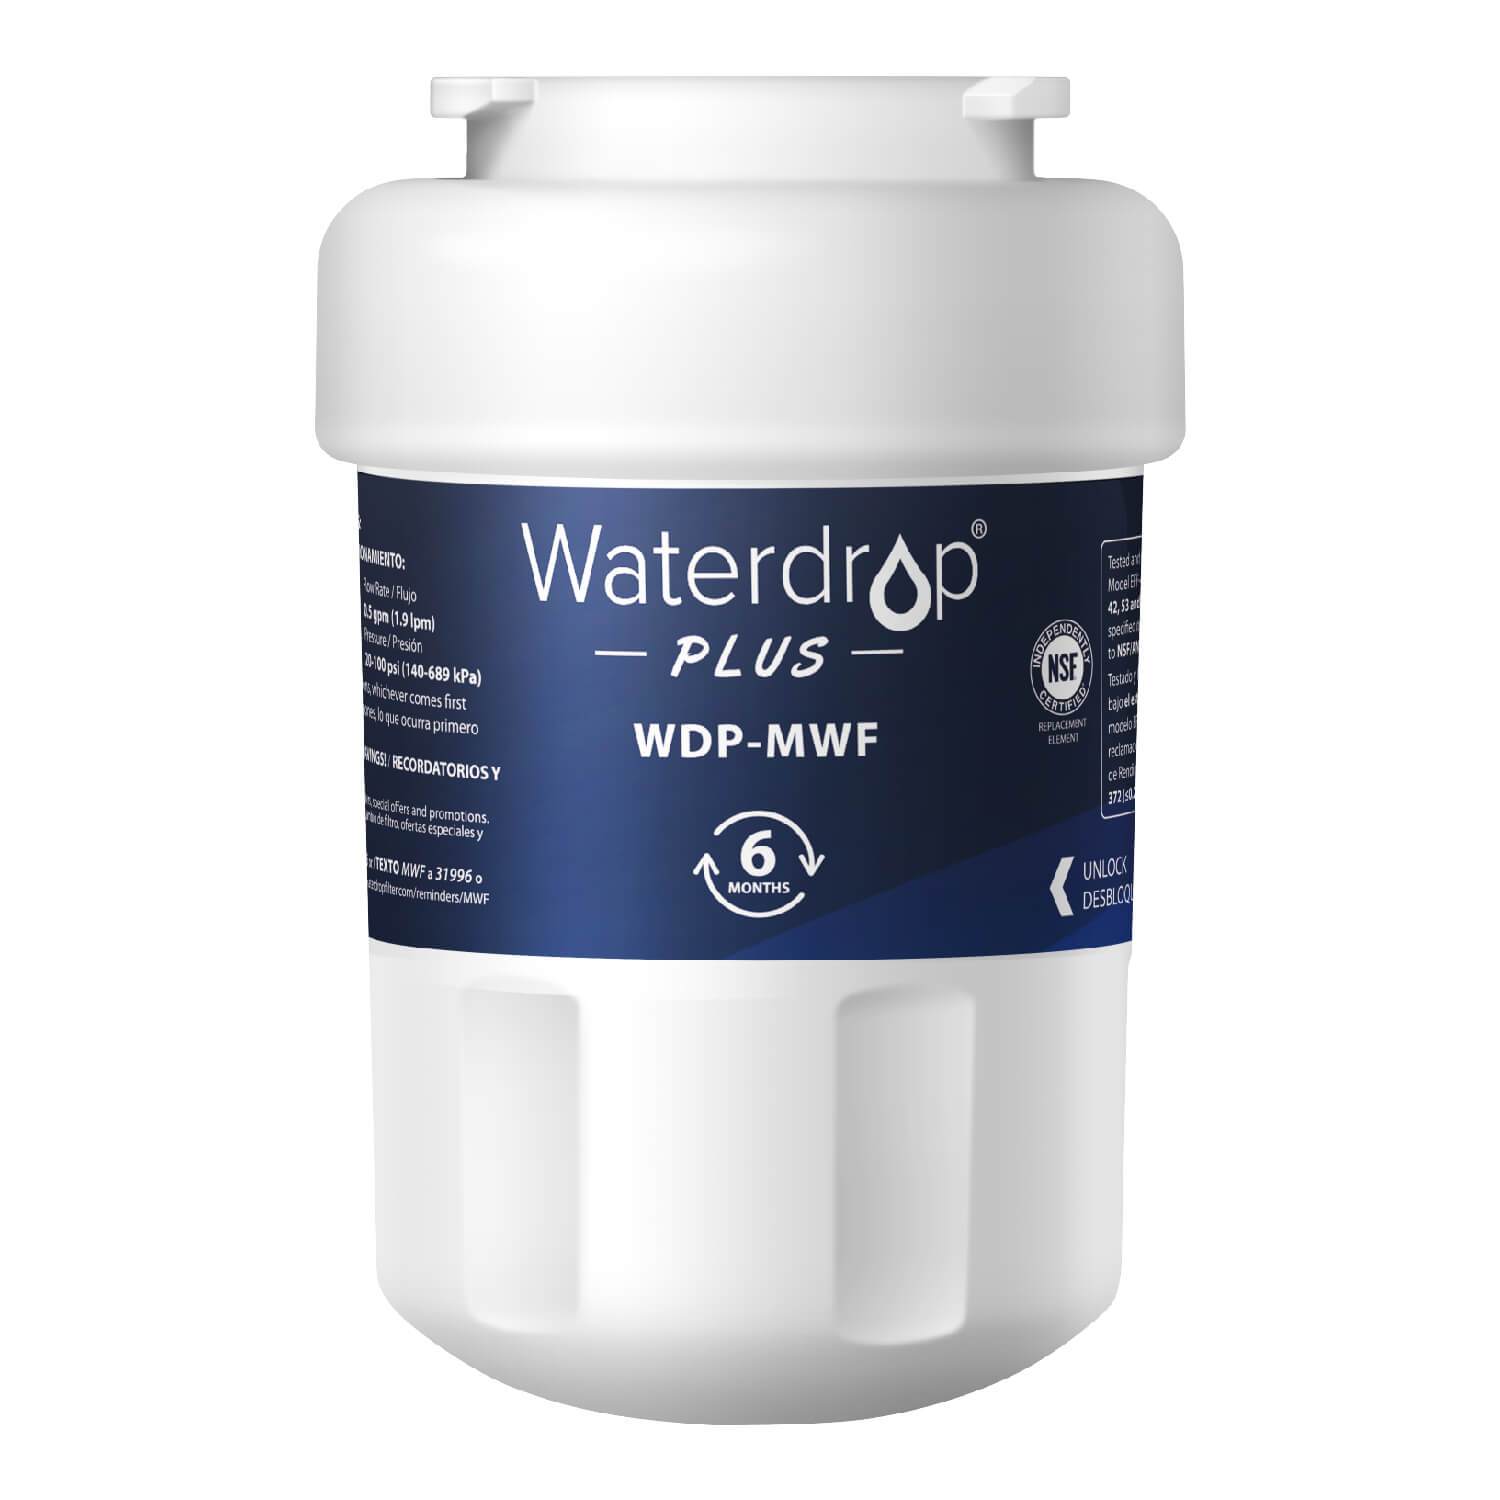 Waterdrop Replacement for GE MWF Refrigerator Water Filter